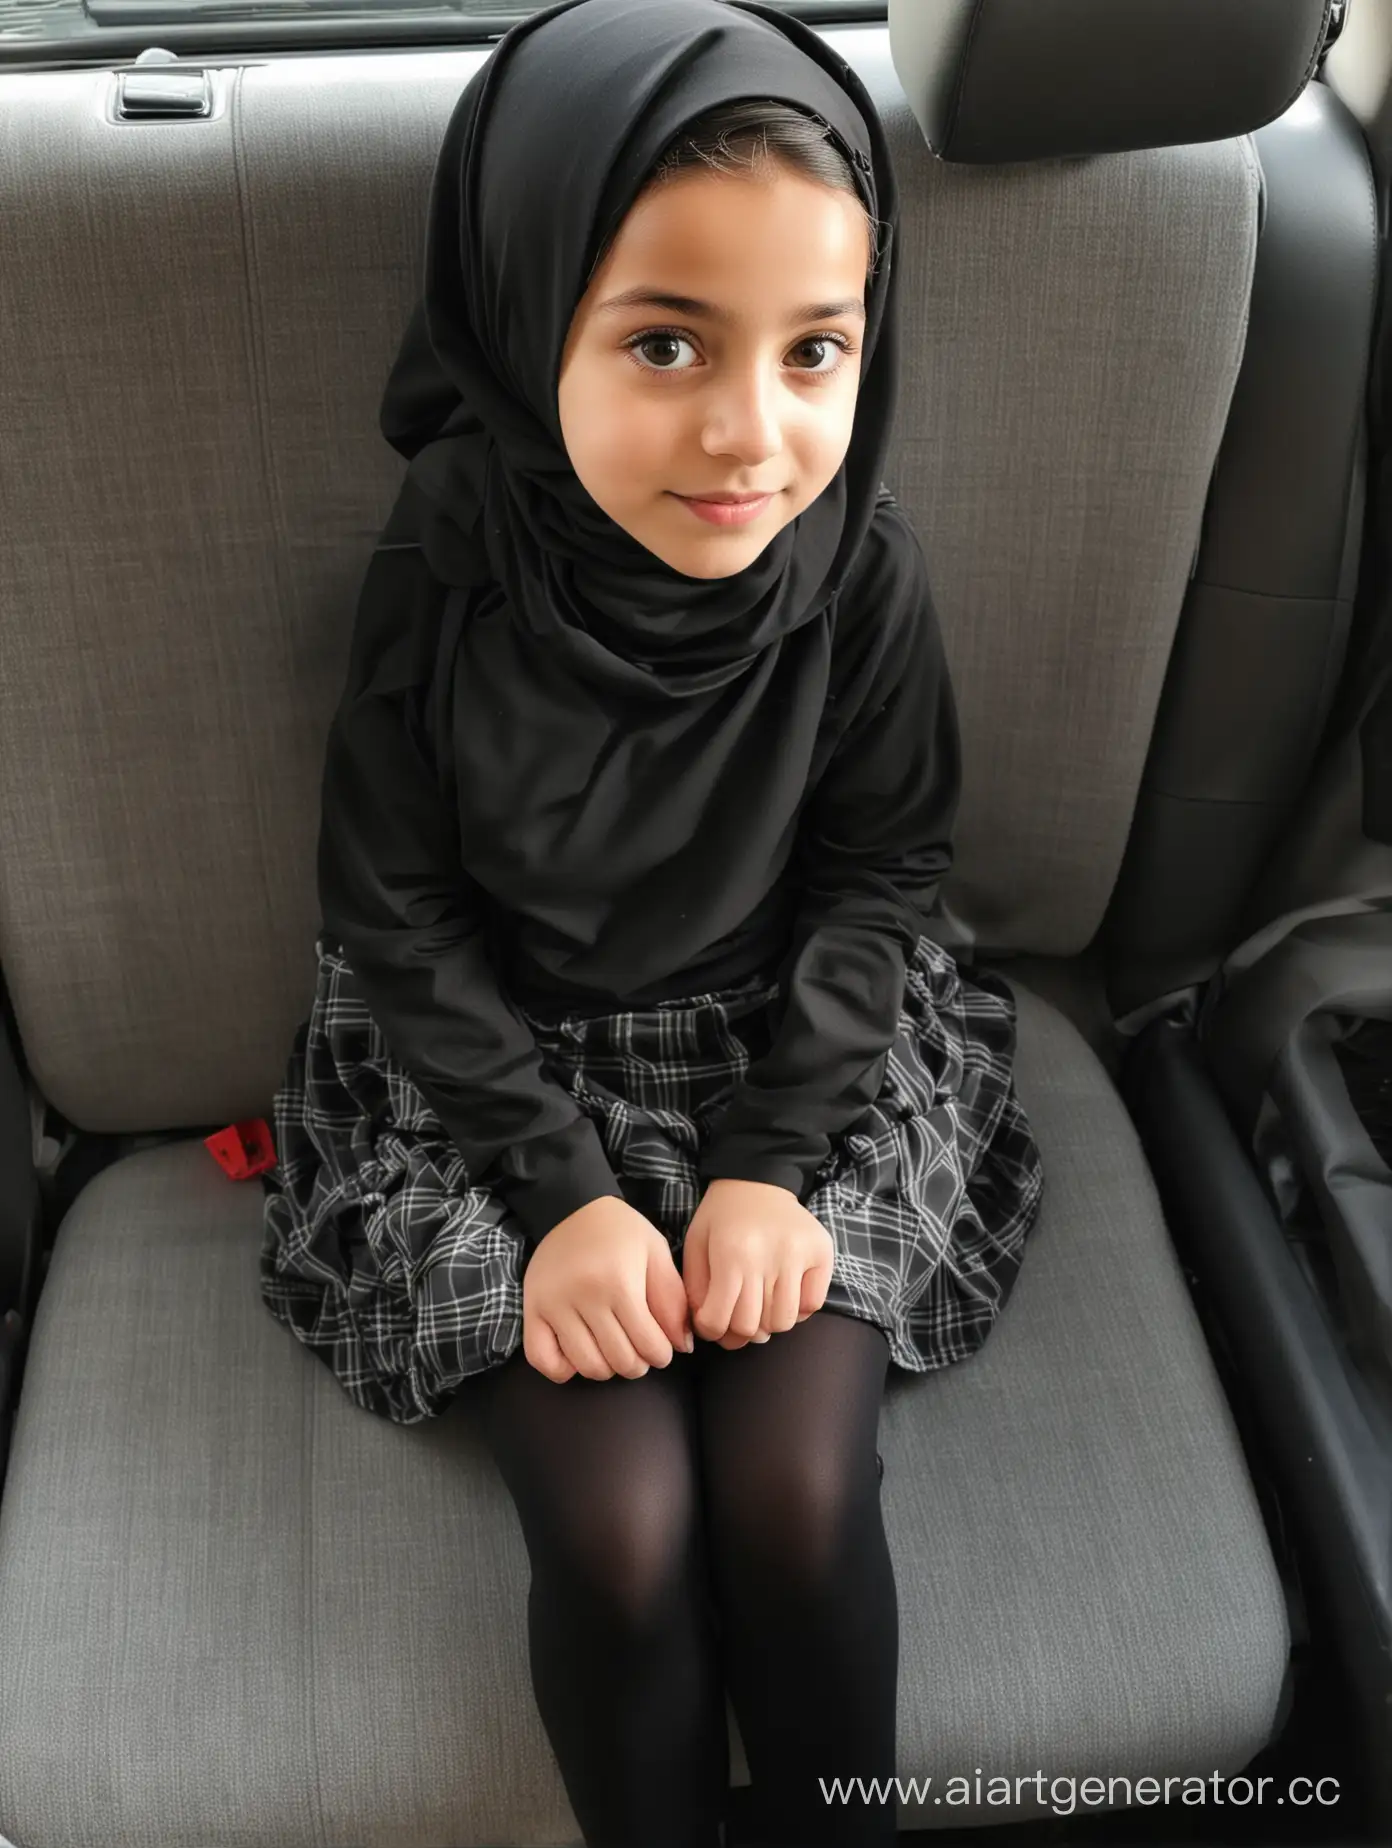 A little girl, 12 years old, hijab, mini school skirt, black opaque tights, sits on the car seat , from above, from top